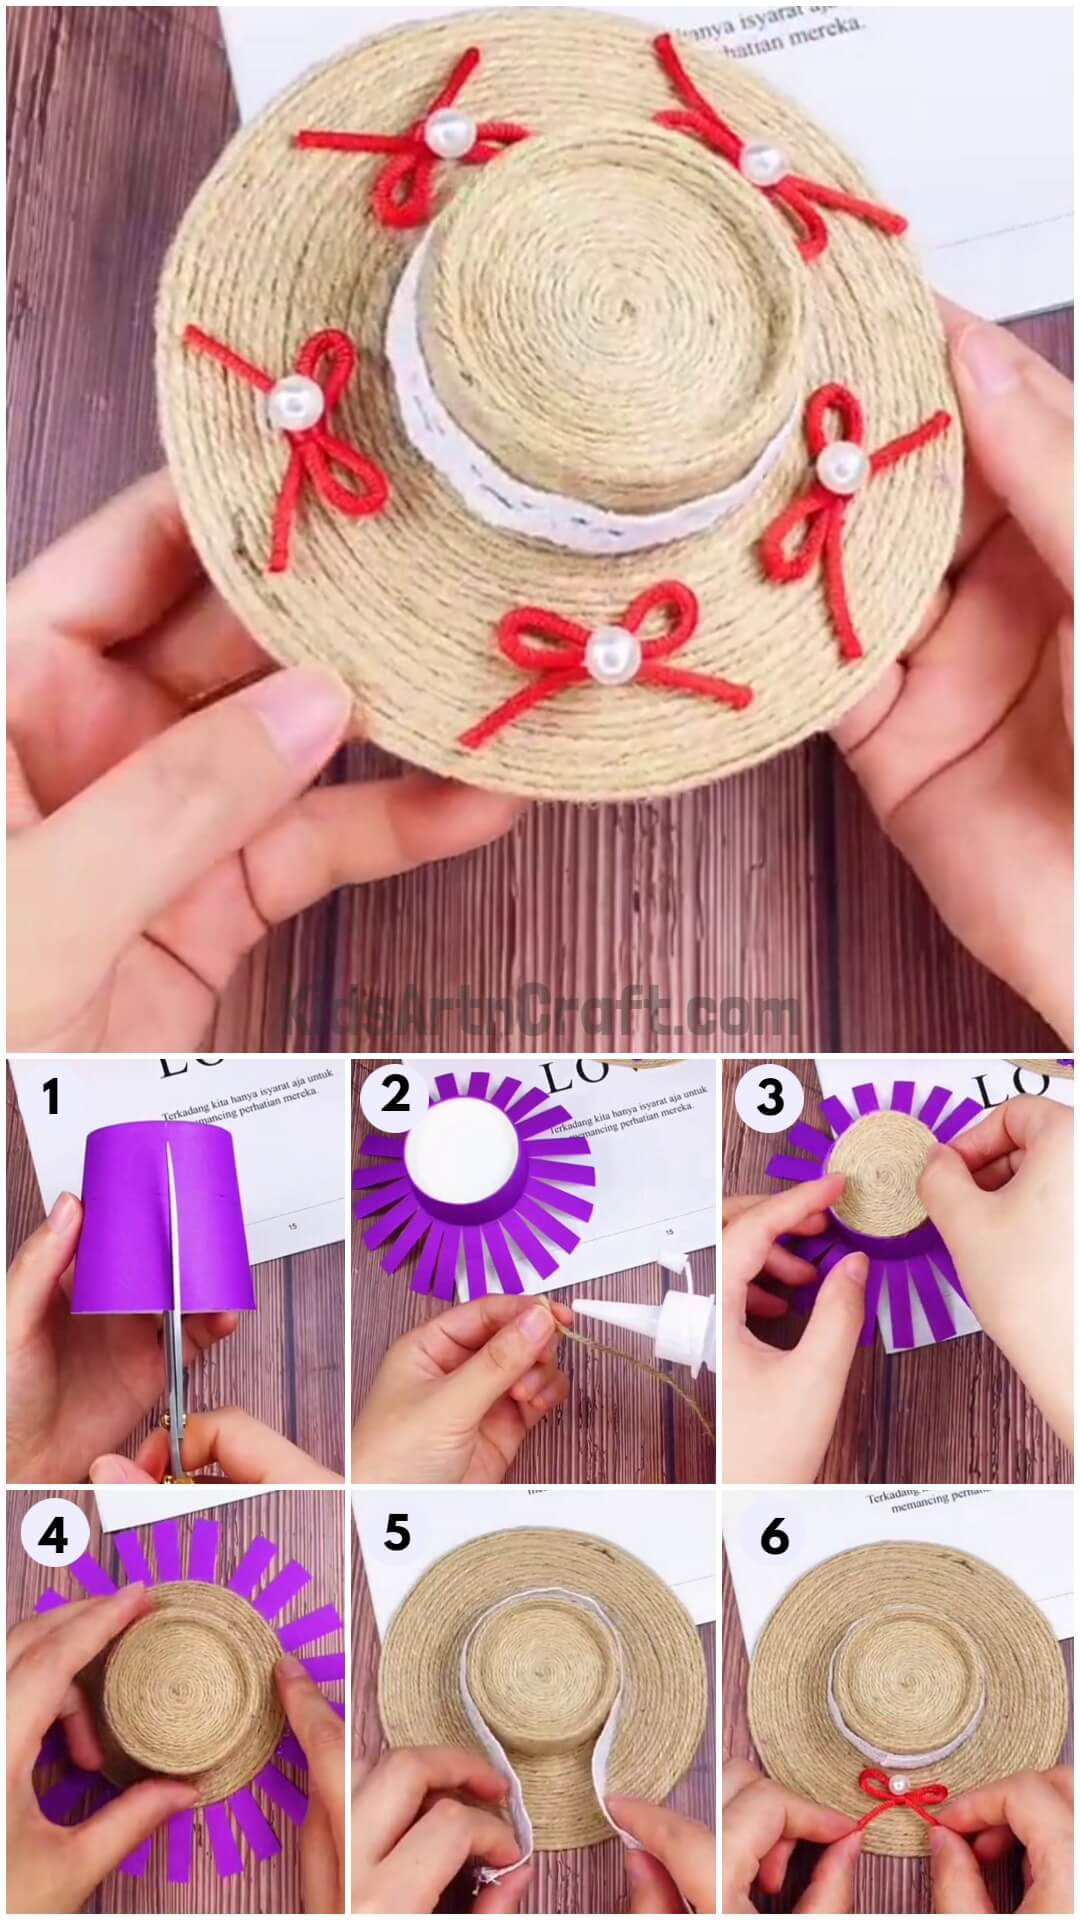  How to Make a Paper Cup and Jute Hat at home